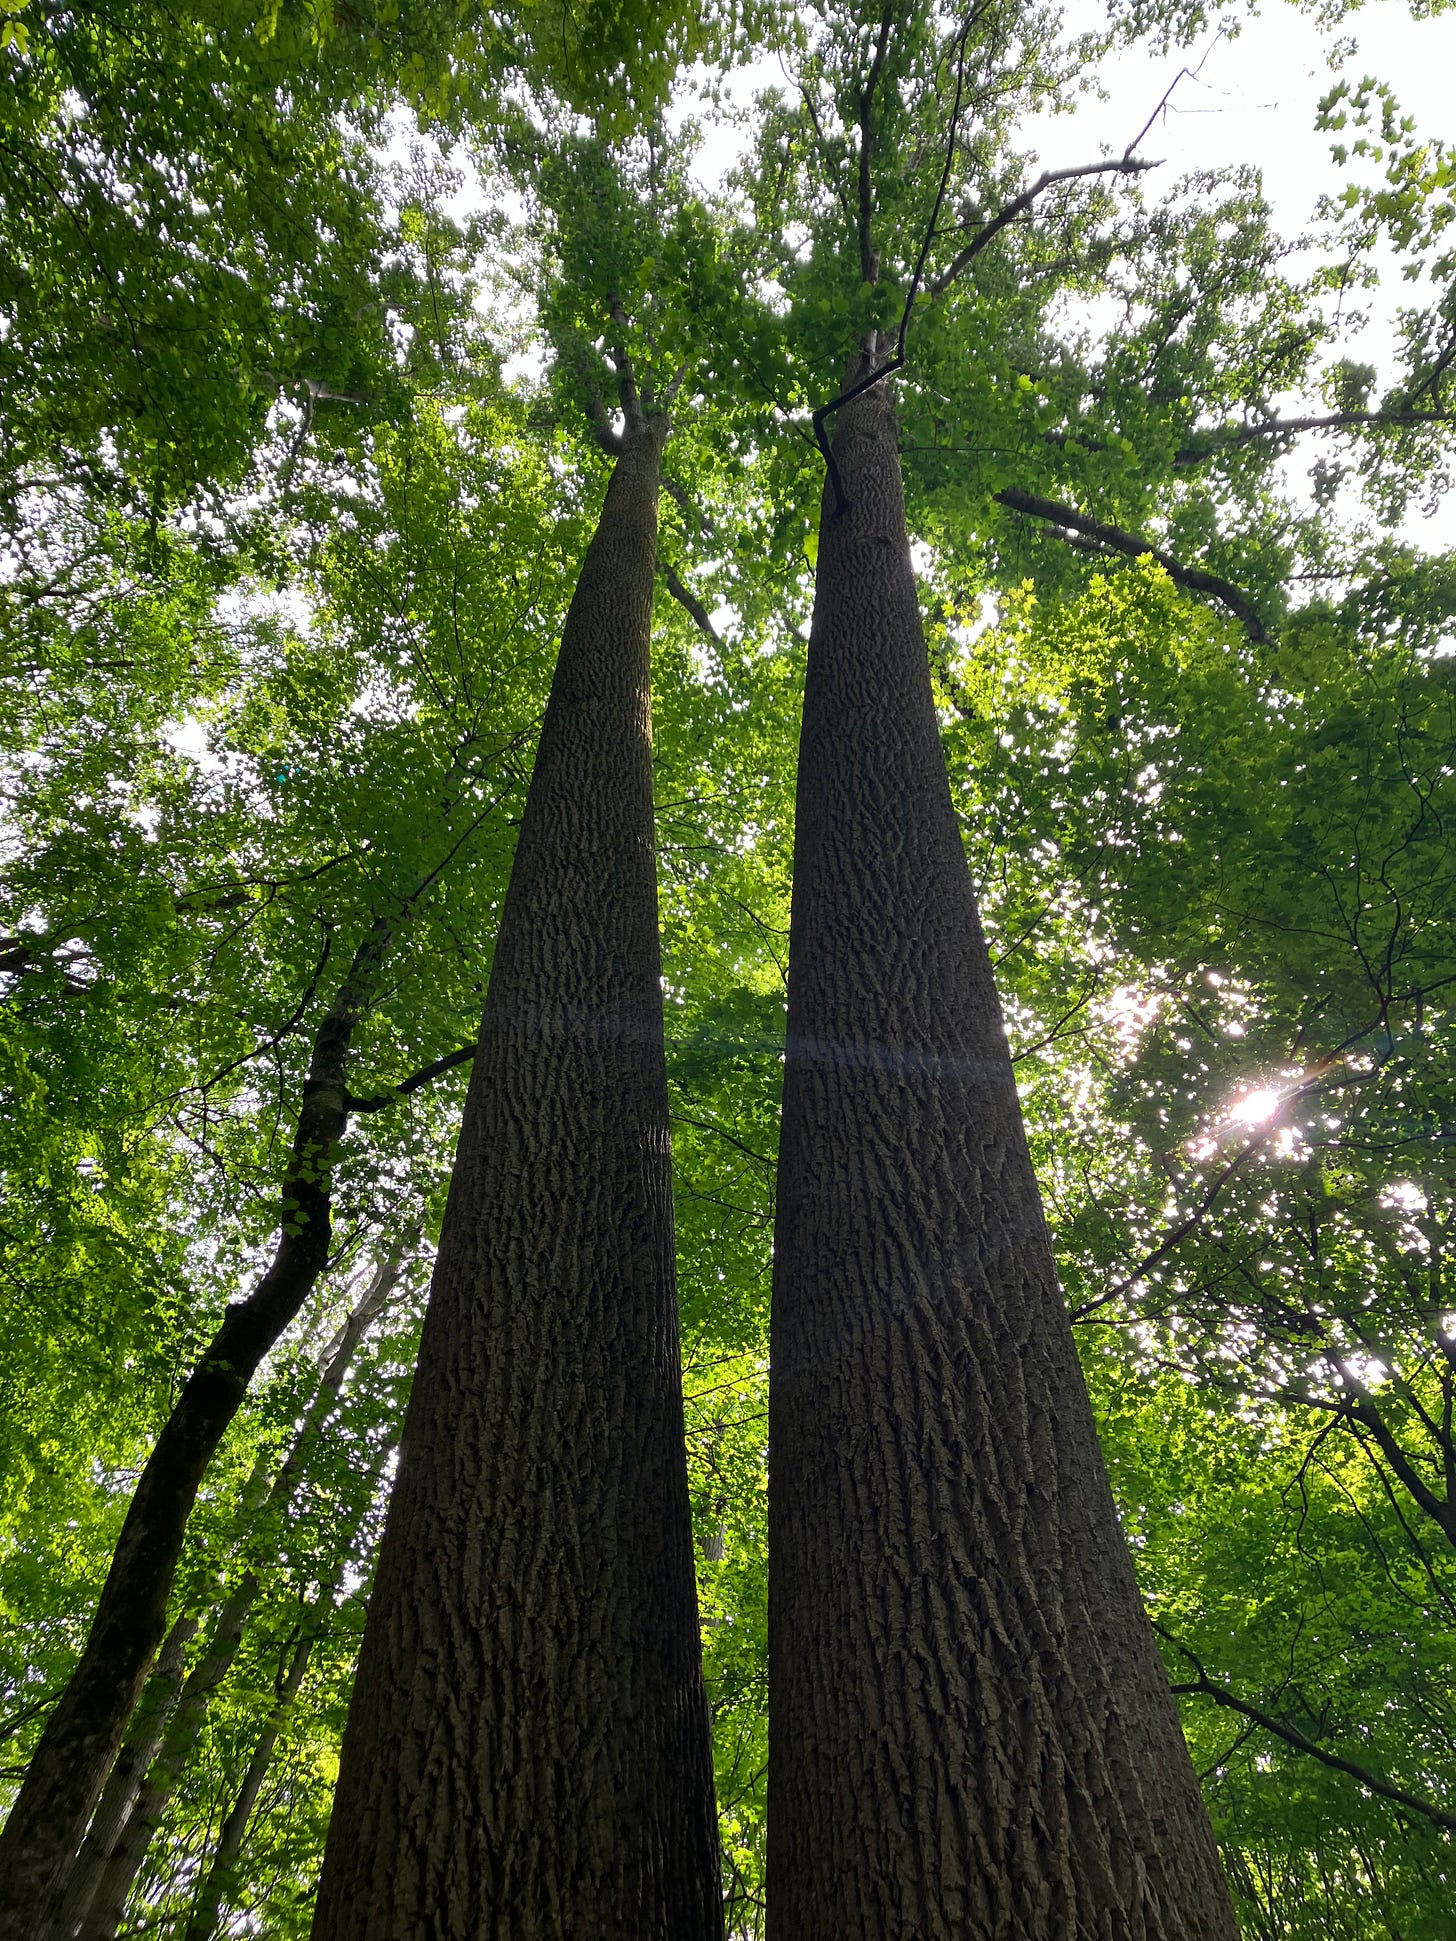 Two towering tulip trees are viewed from beneath